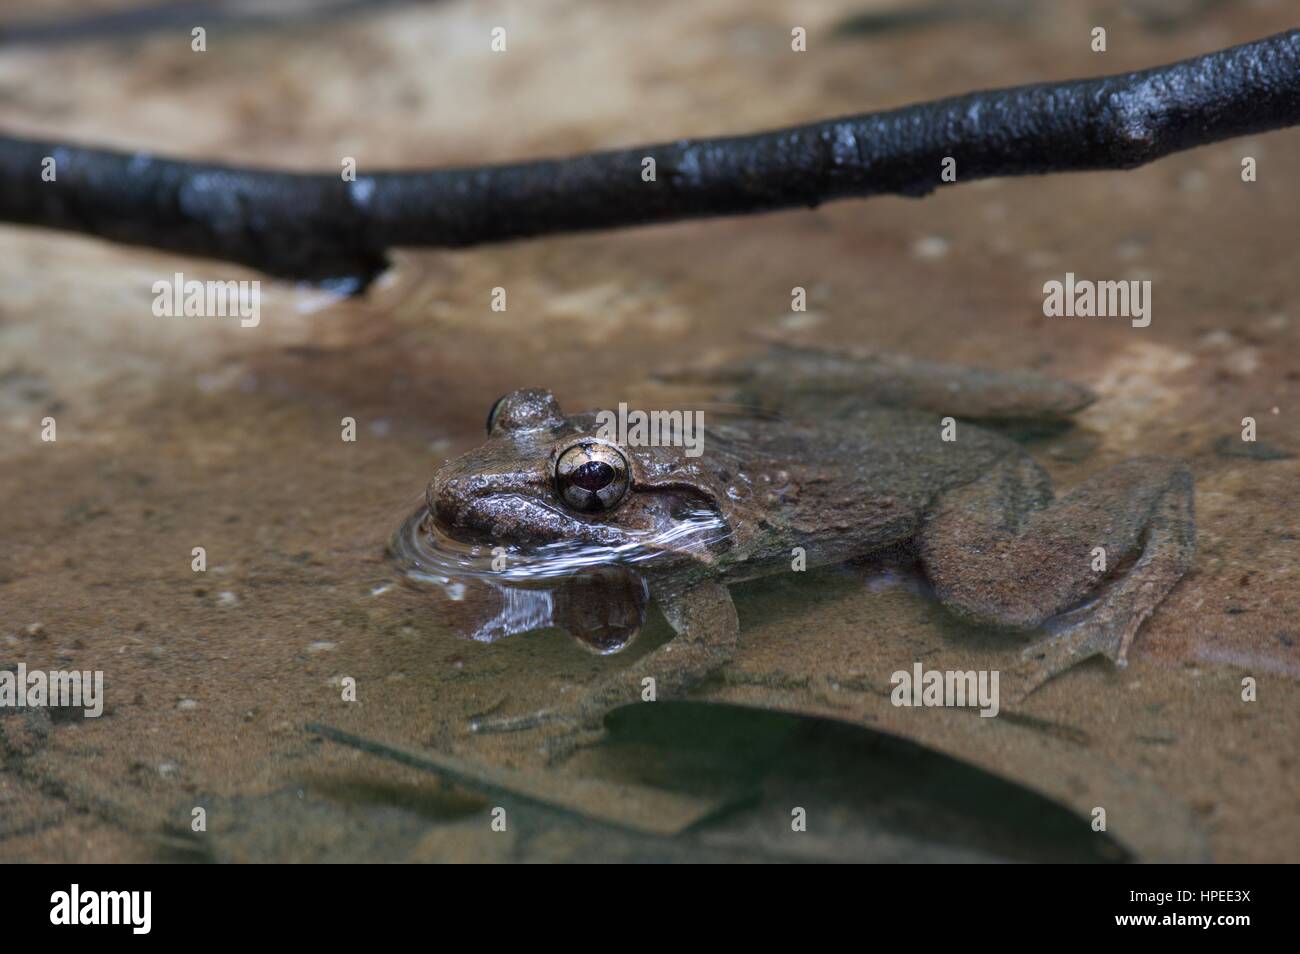 A Rough-backed River Frog (Limnonectes ibanorum) in a shallow stream at Bako National Park, Sarawak, East Malaysia, Borneo Stock Photo